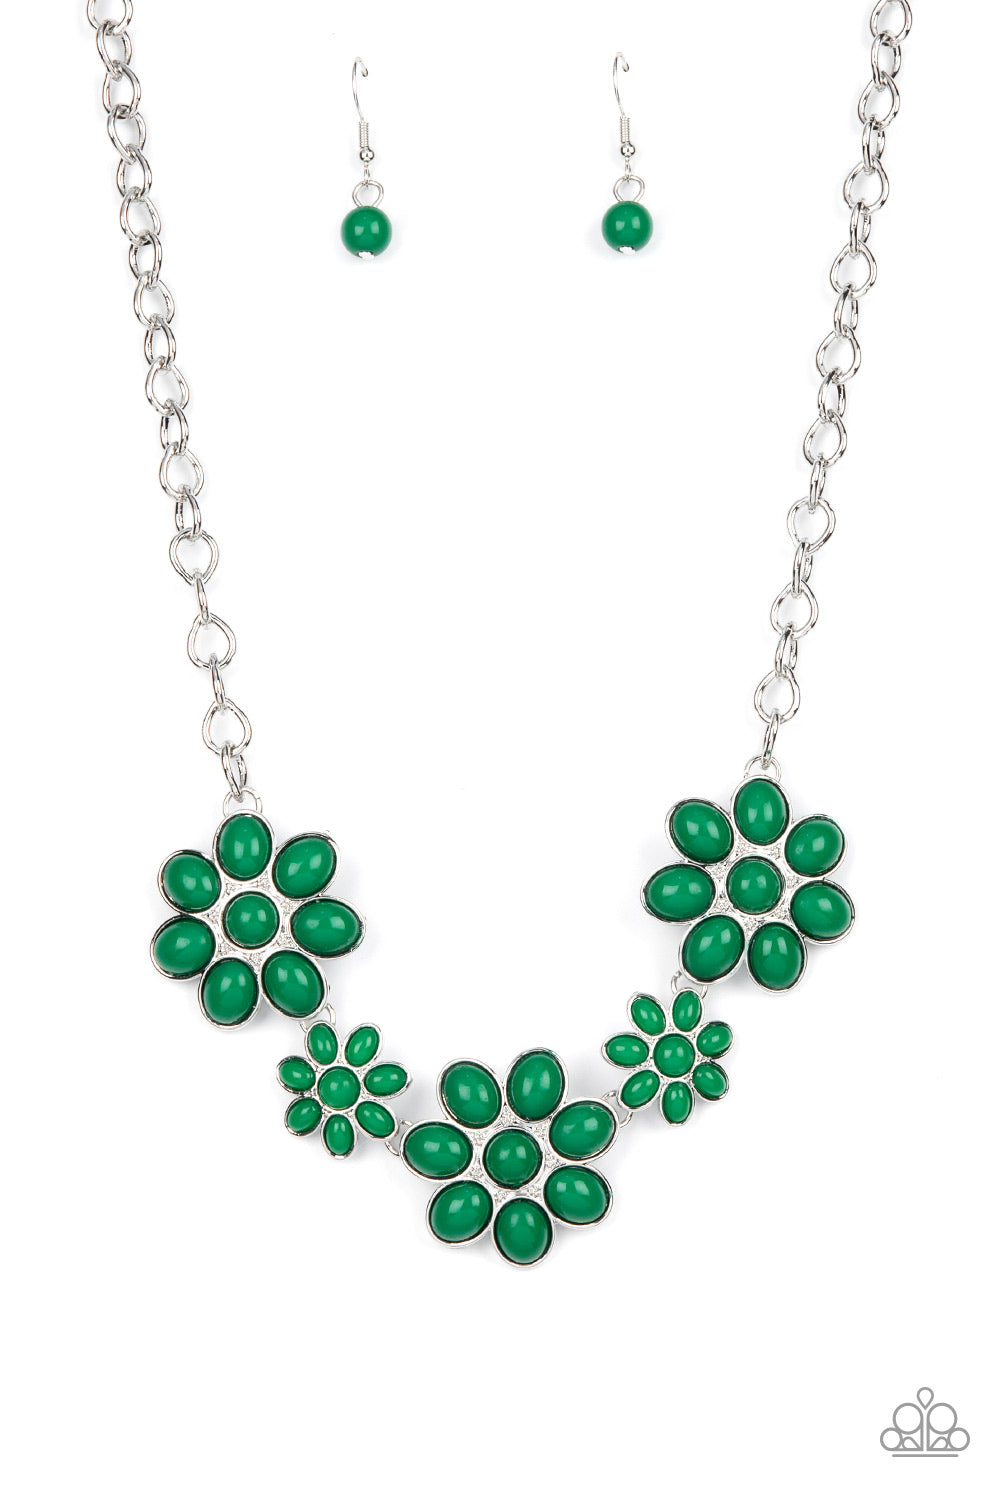 Paparazzi Accessories - Flamboyantly Flowering - Green Necklaces flirtatious collection of Leprechaun dotted floral frames alternate with dainty opaque Leprechaun flowers below the collar, creating a verdant pop of color. Features an adjustable clasp closure.  Sold as one individual necklace. Includes one pair of matching earrings.